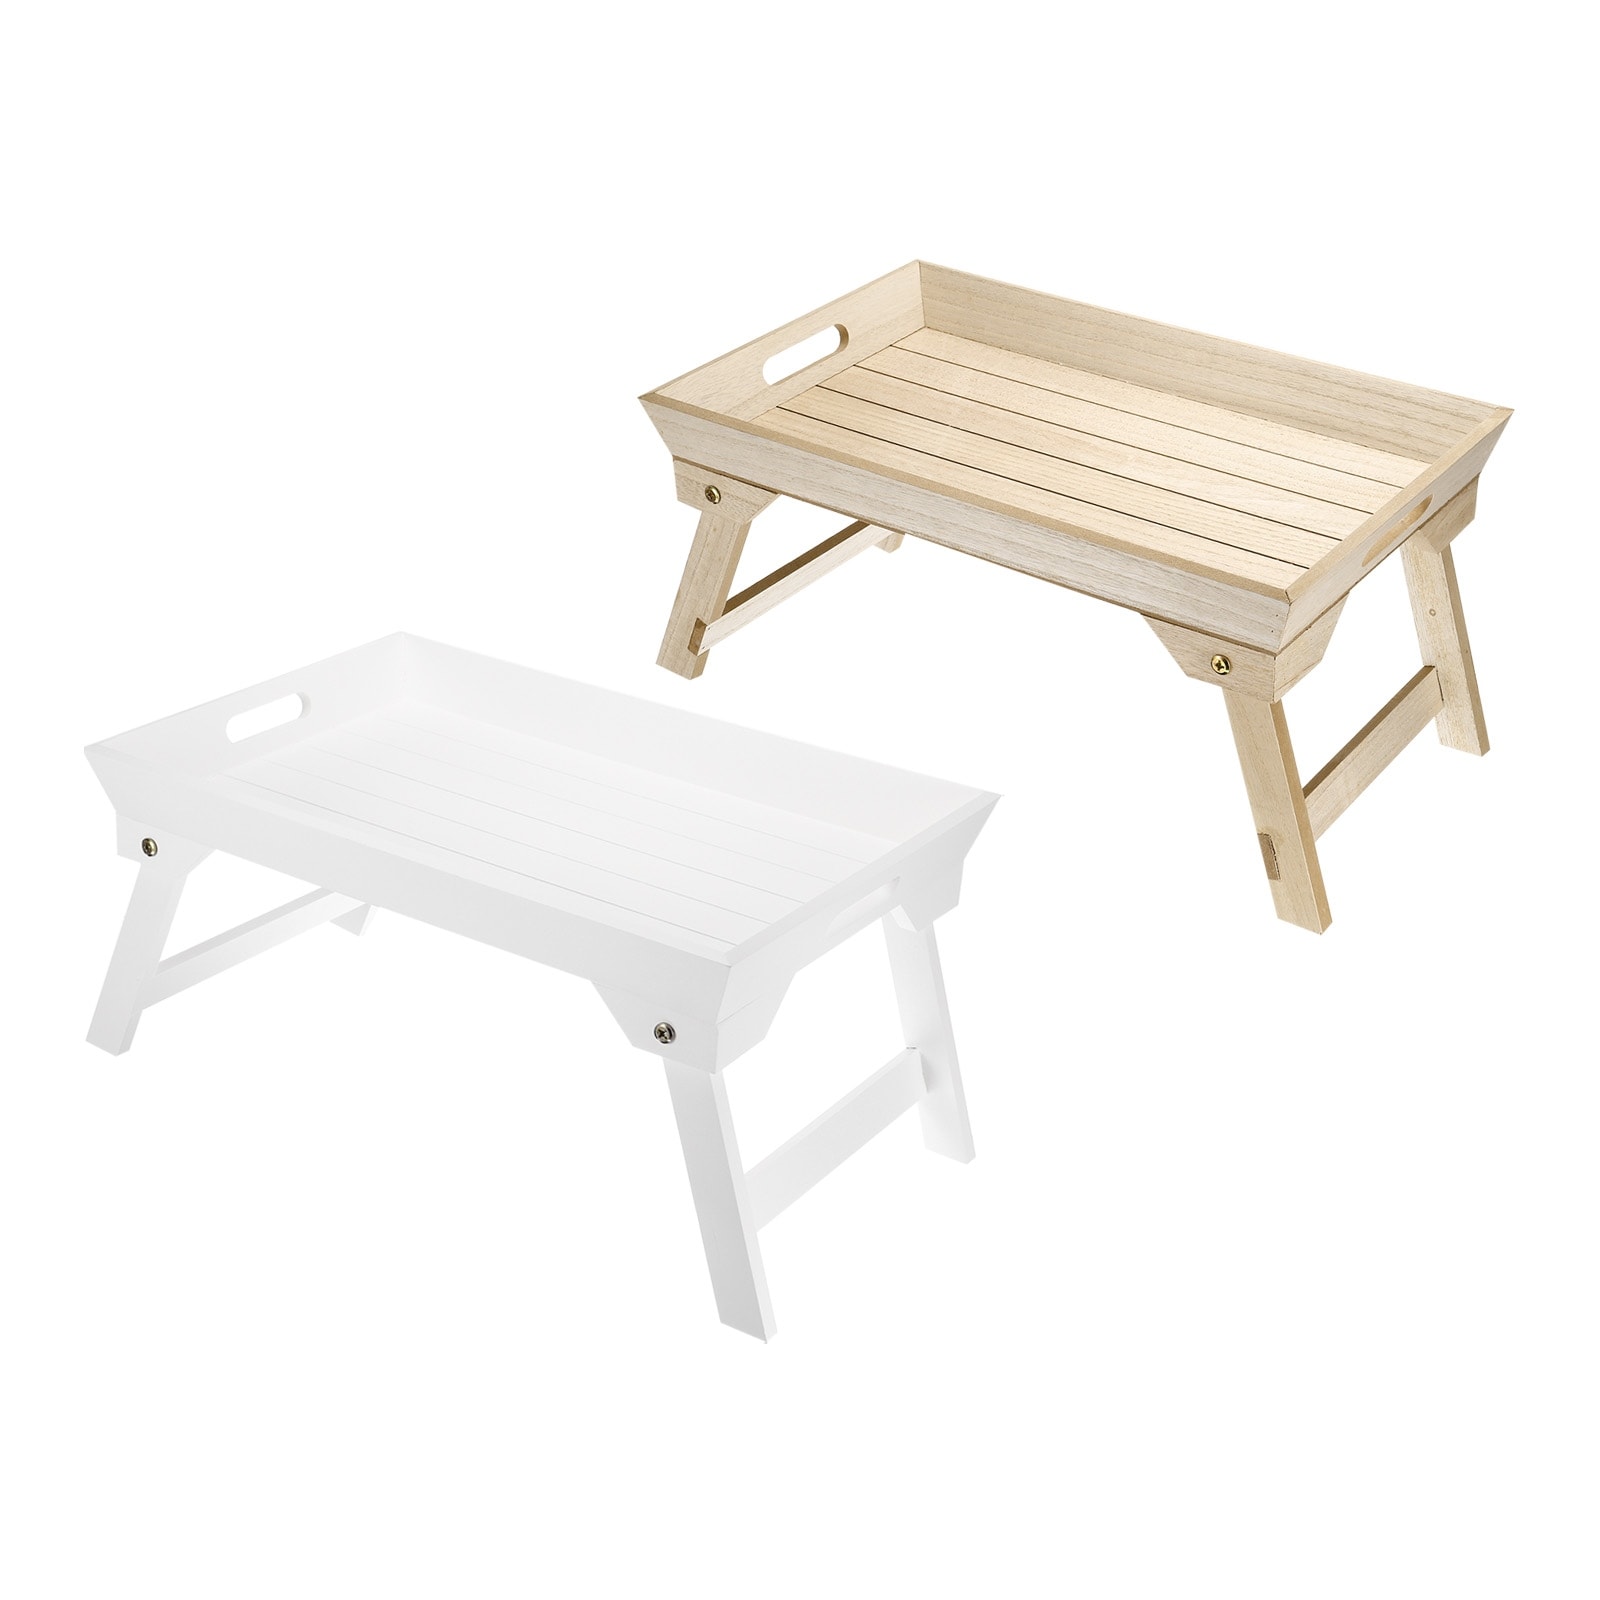 Breakfast Tray Table with Folding Legs Rectangle Serving Tray - On Sale -  Bed Bath & Beyond - 37652859